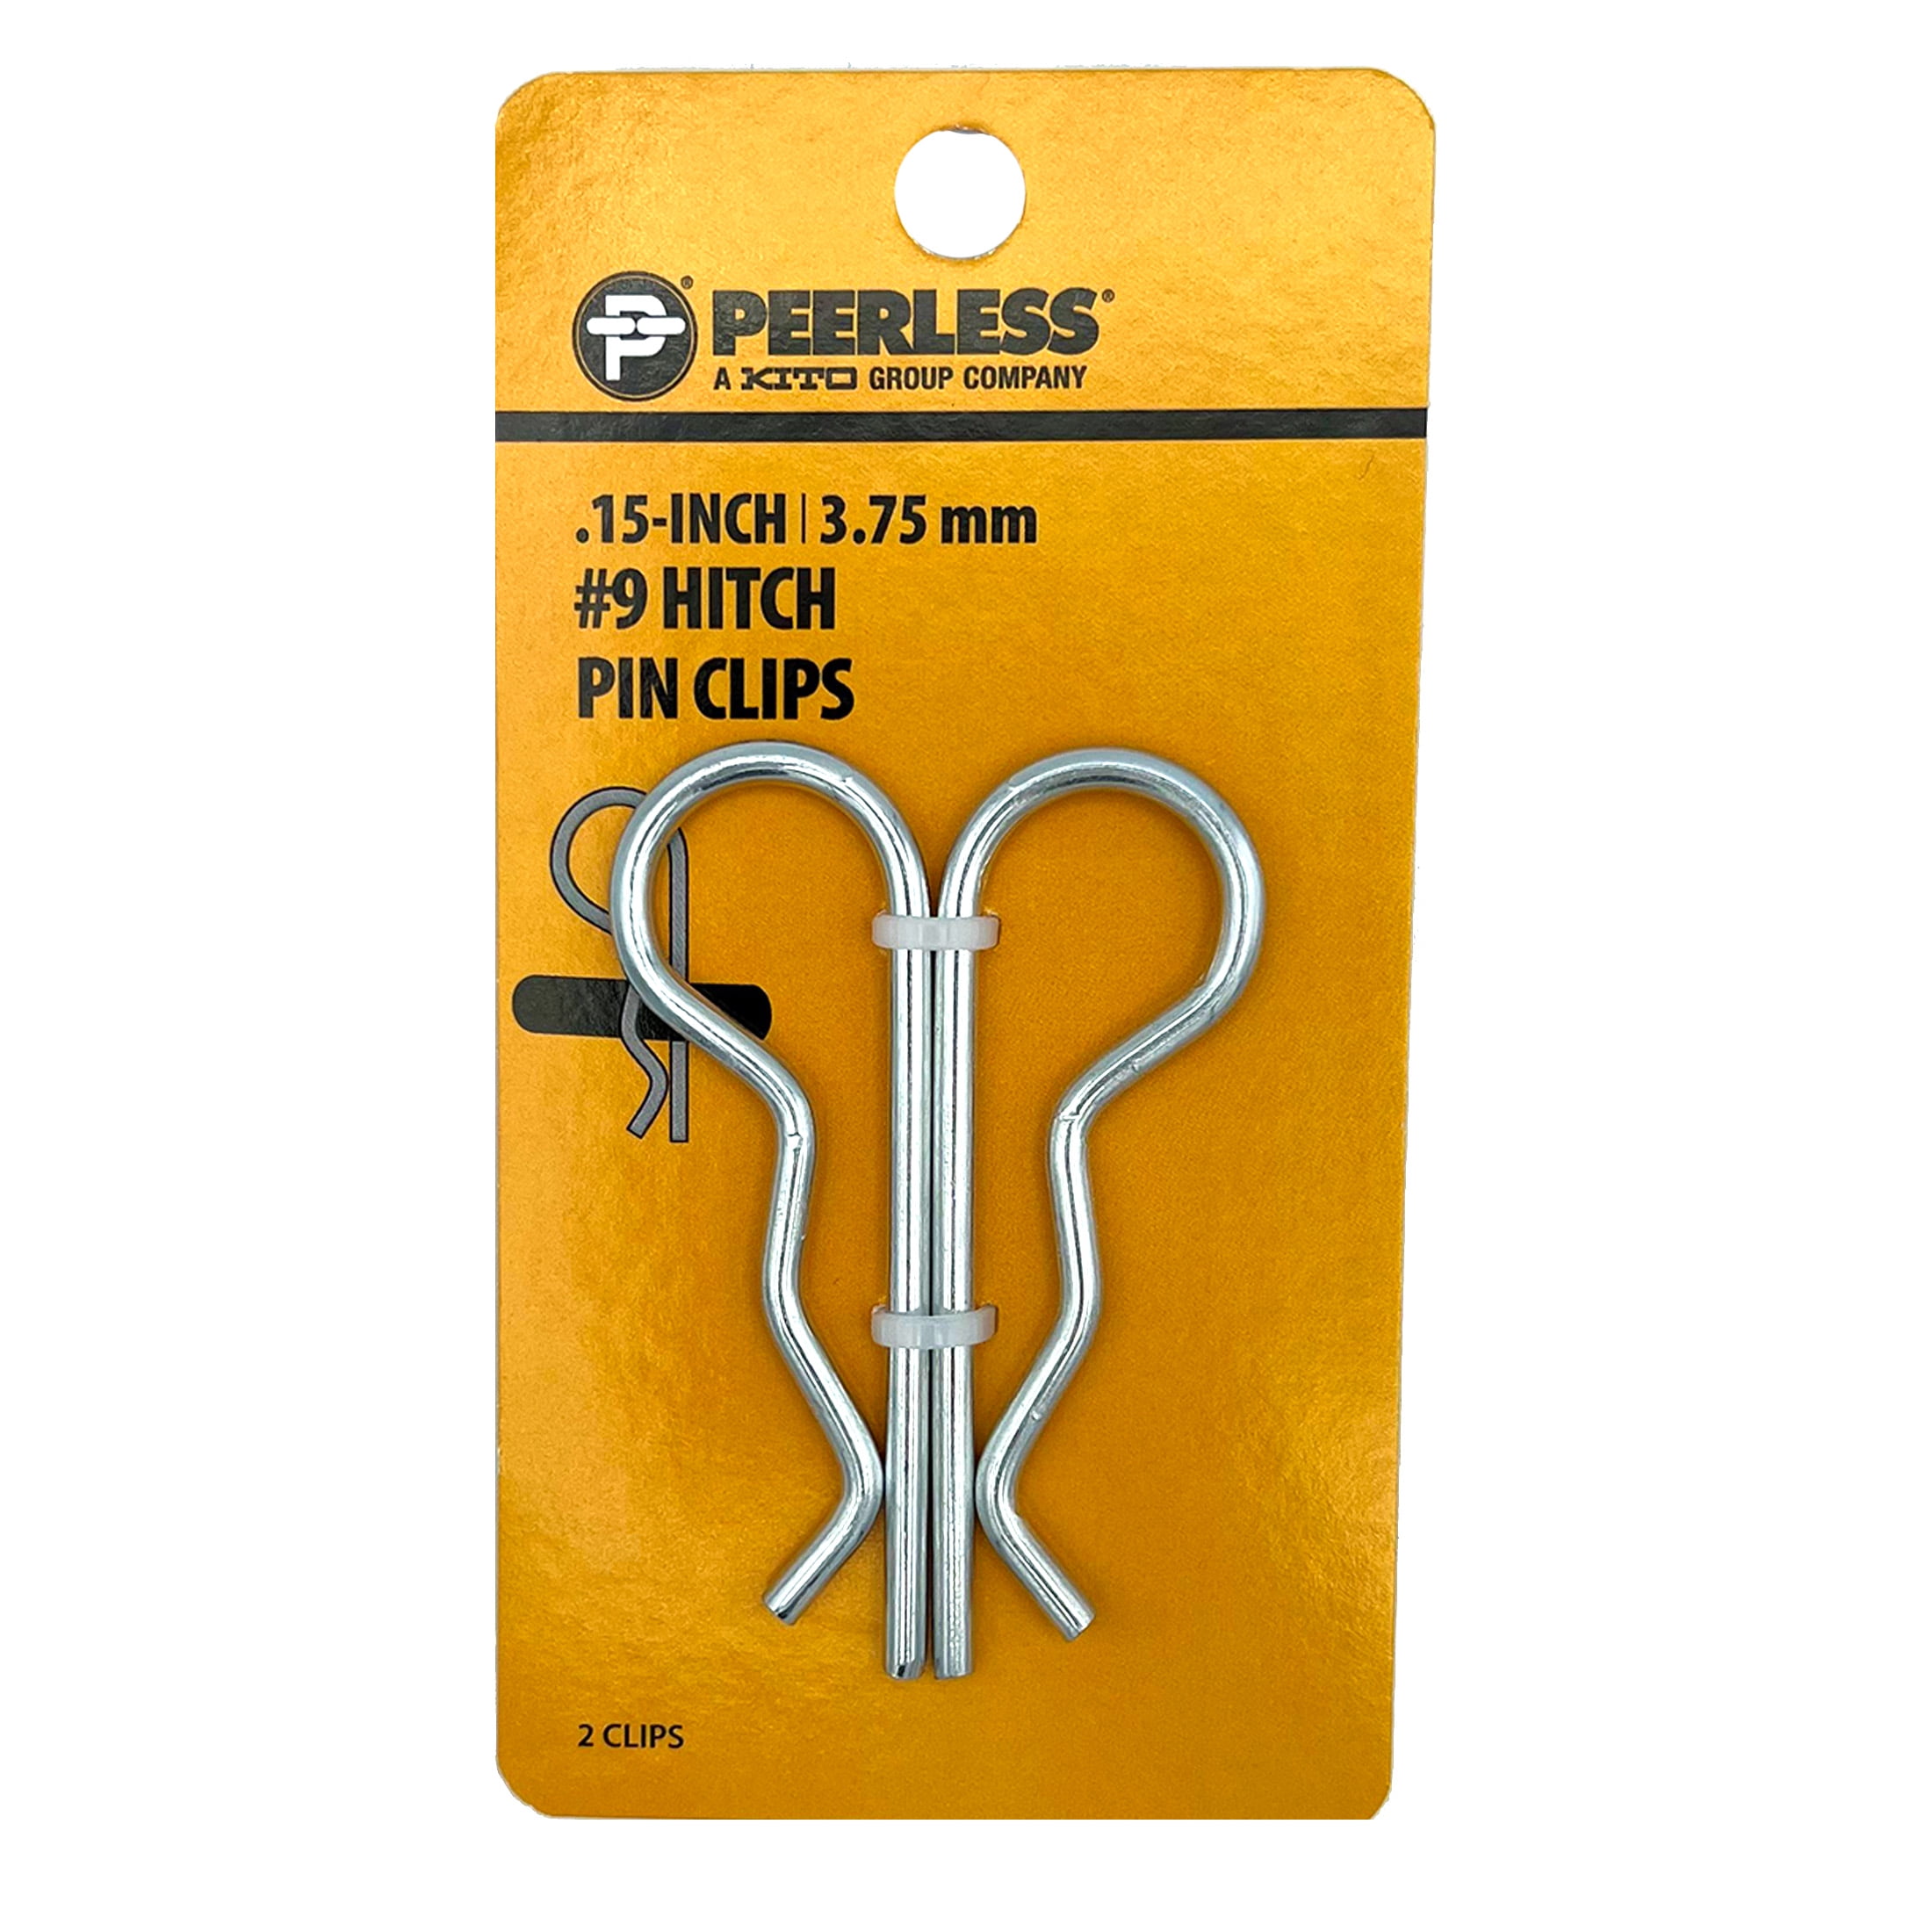 #9 Hitch Pin Clips, 2-Pack, Zinc-Plated, Peerless Chain Company, #4709038